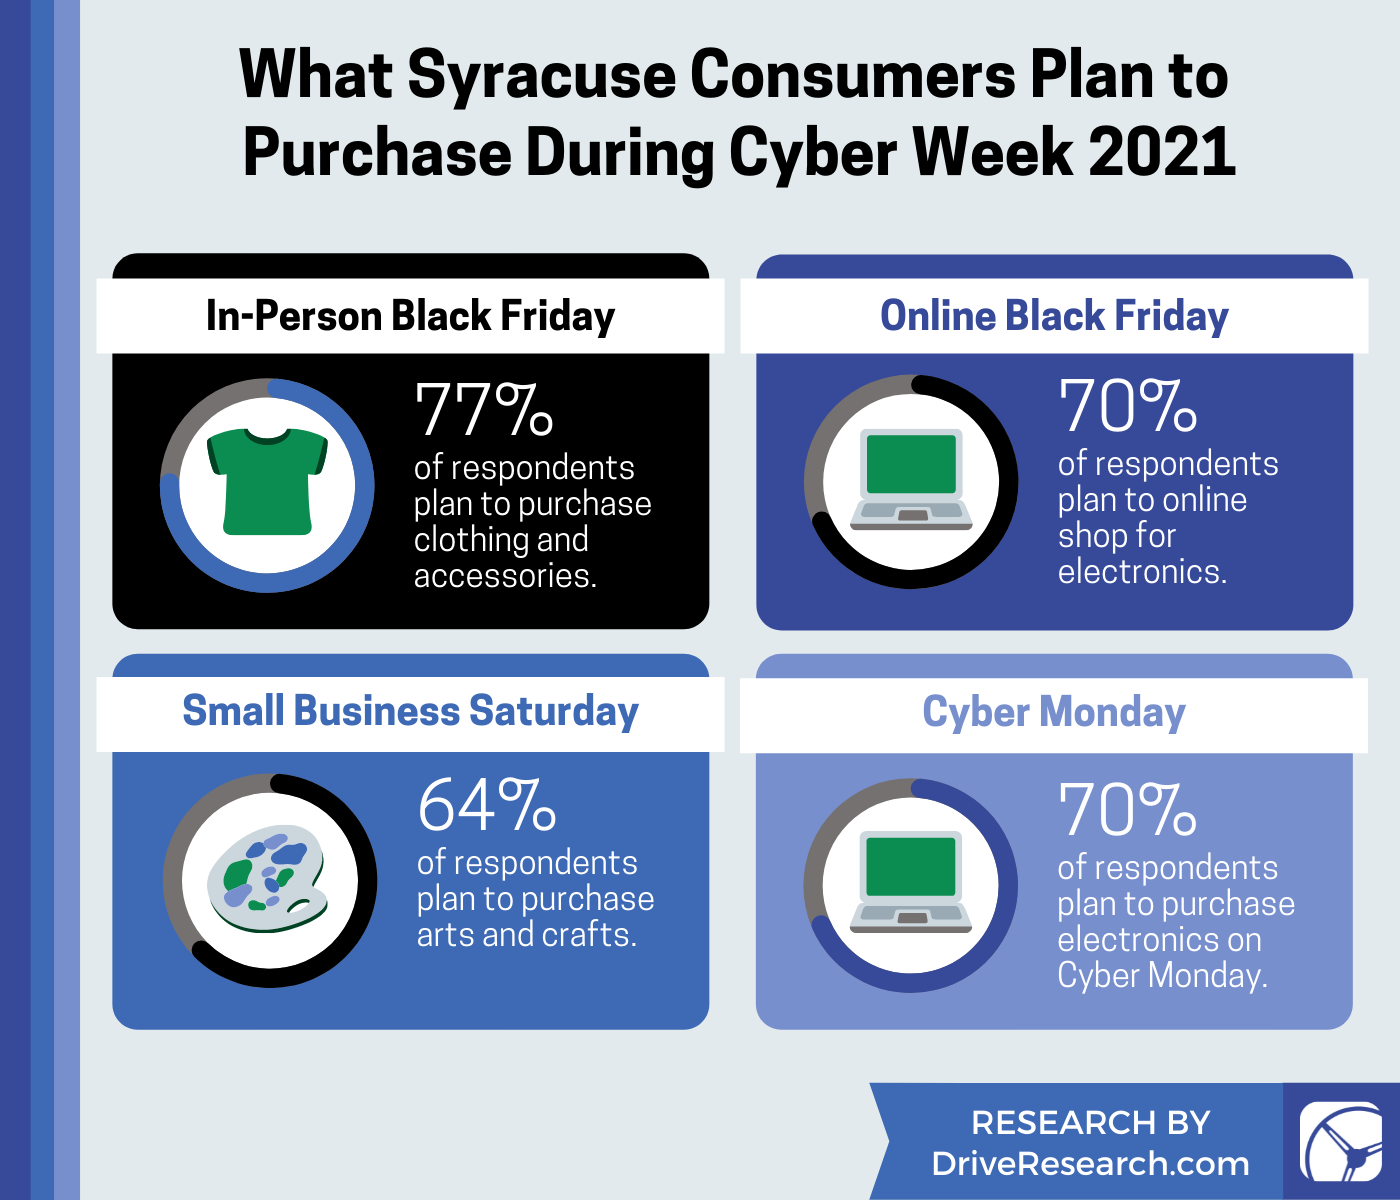 CHART - What Syracuse Consumers Plan to Purchase During Cyber Week 2021